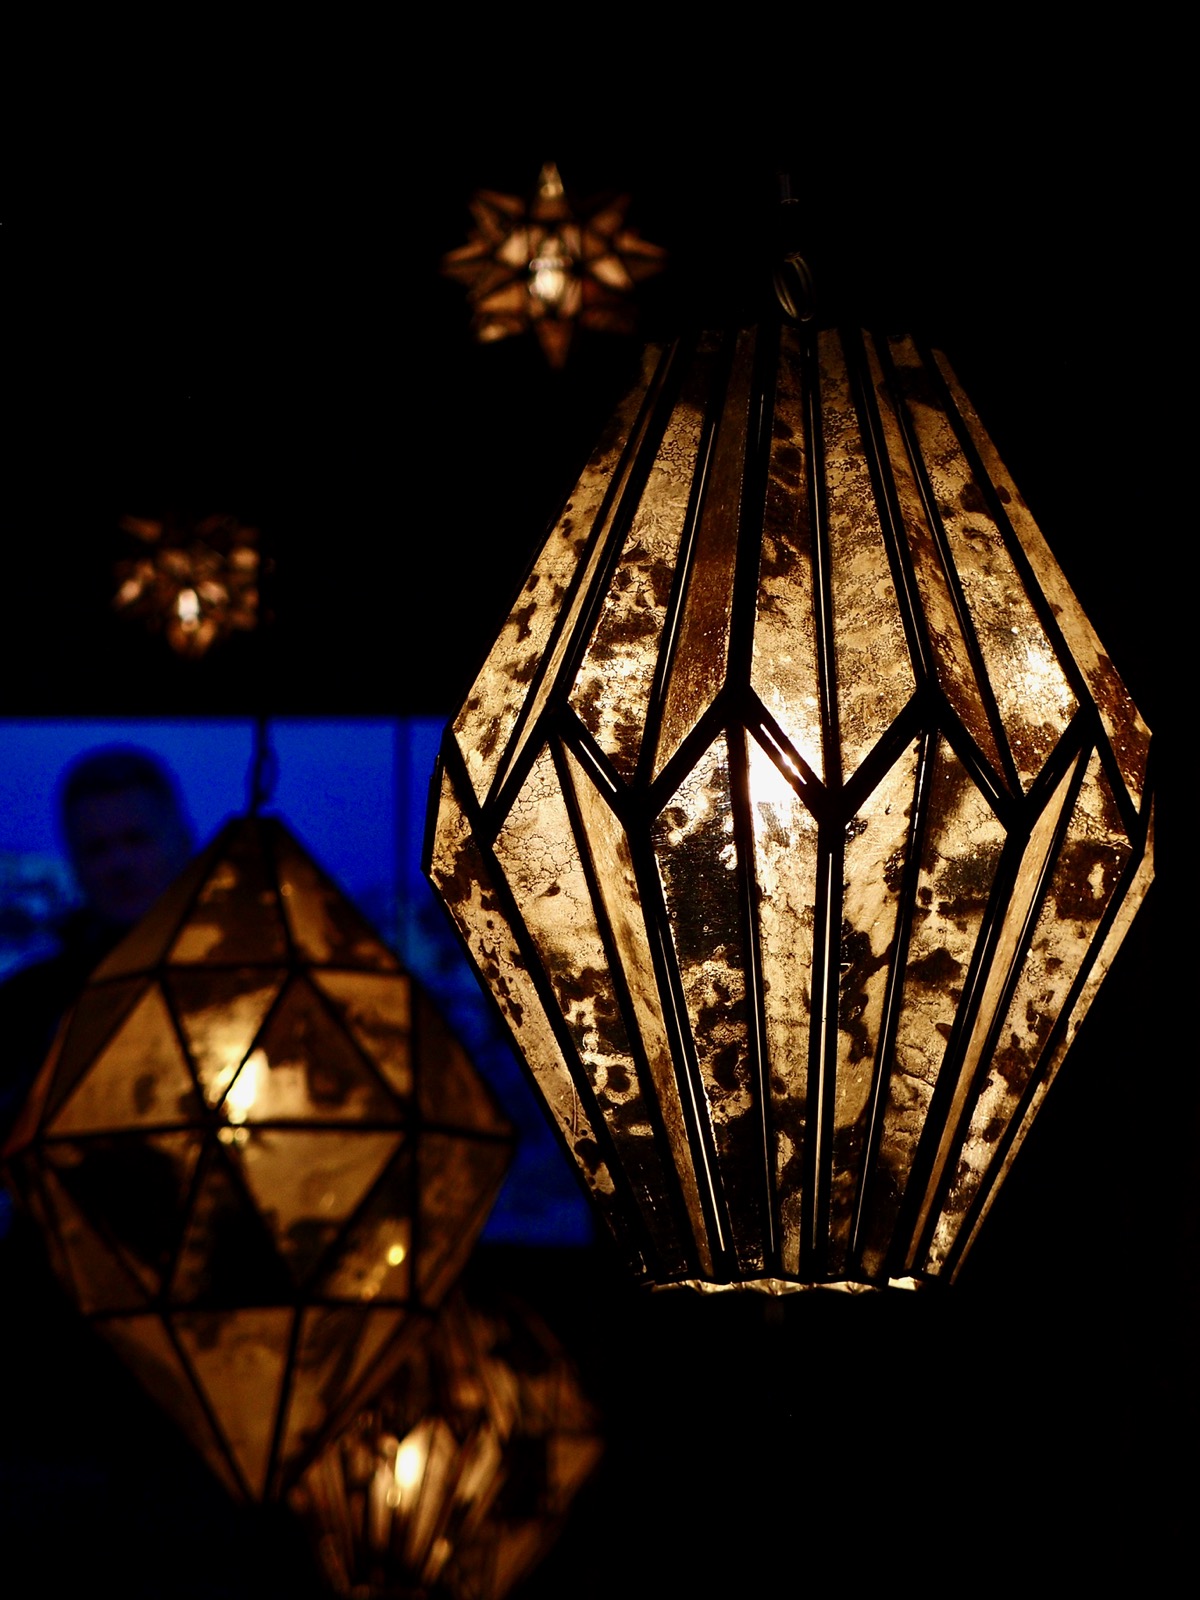 Some hanging lamps in a restaurant against a dark background